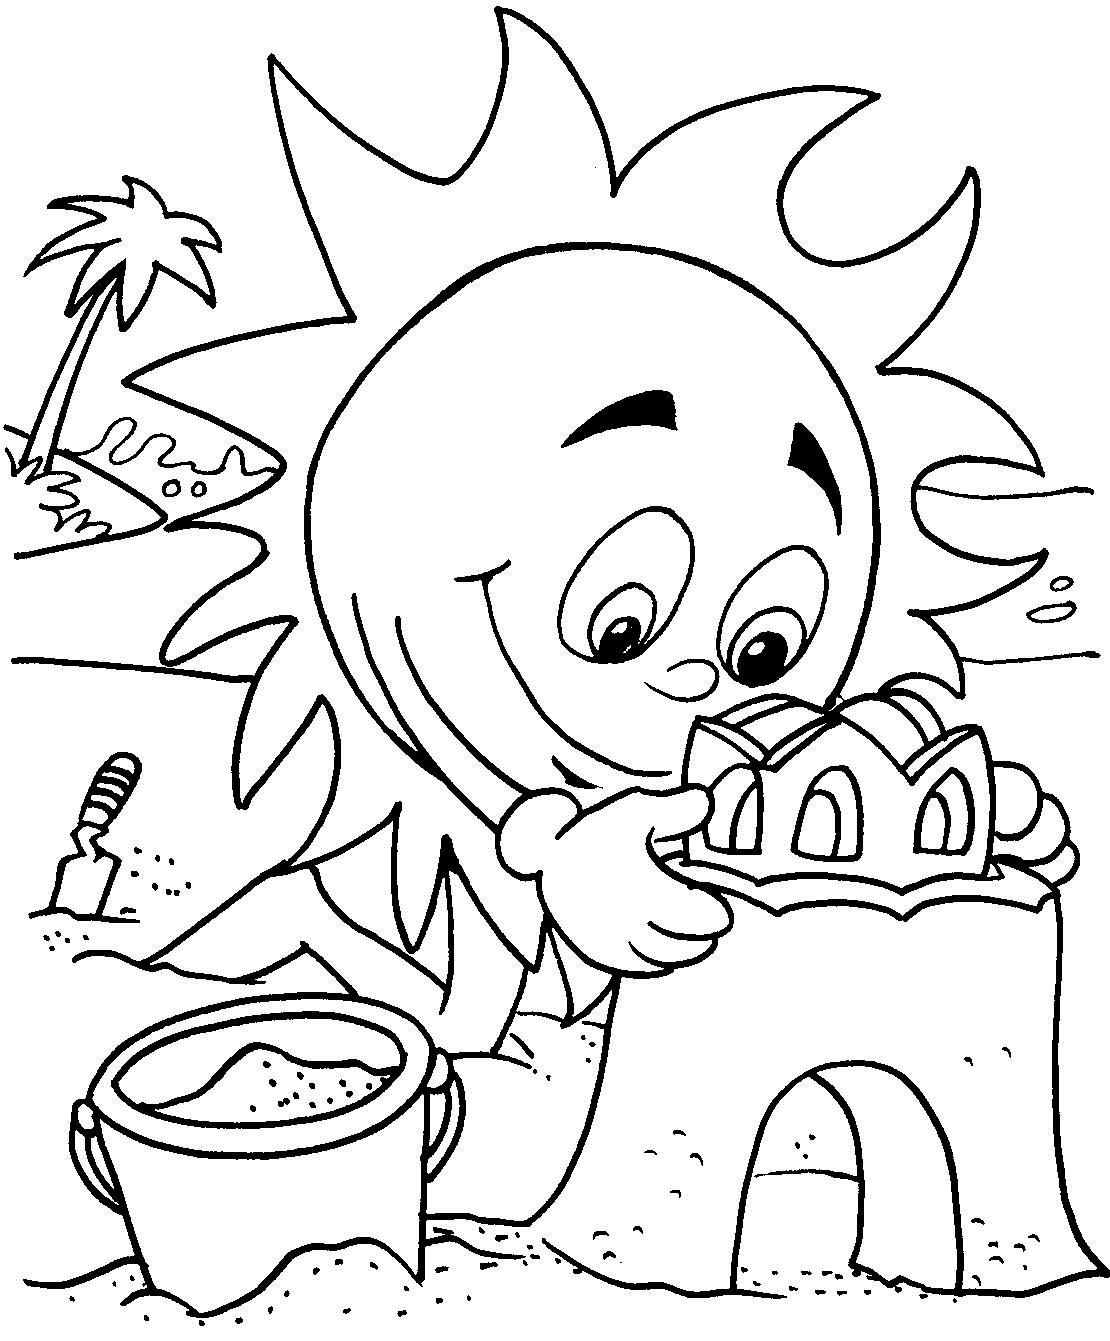 Summer Coloring Pages Free Summer Coloring Pages For Kids Print Them All For Free